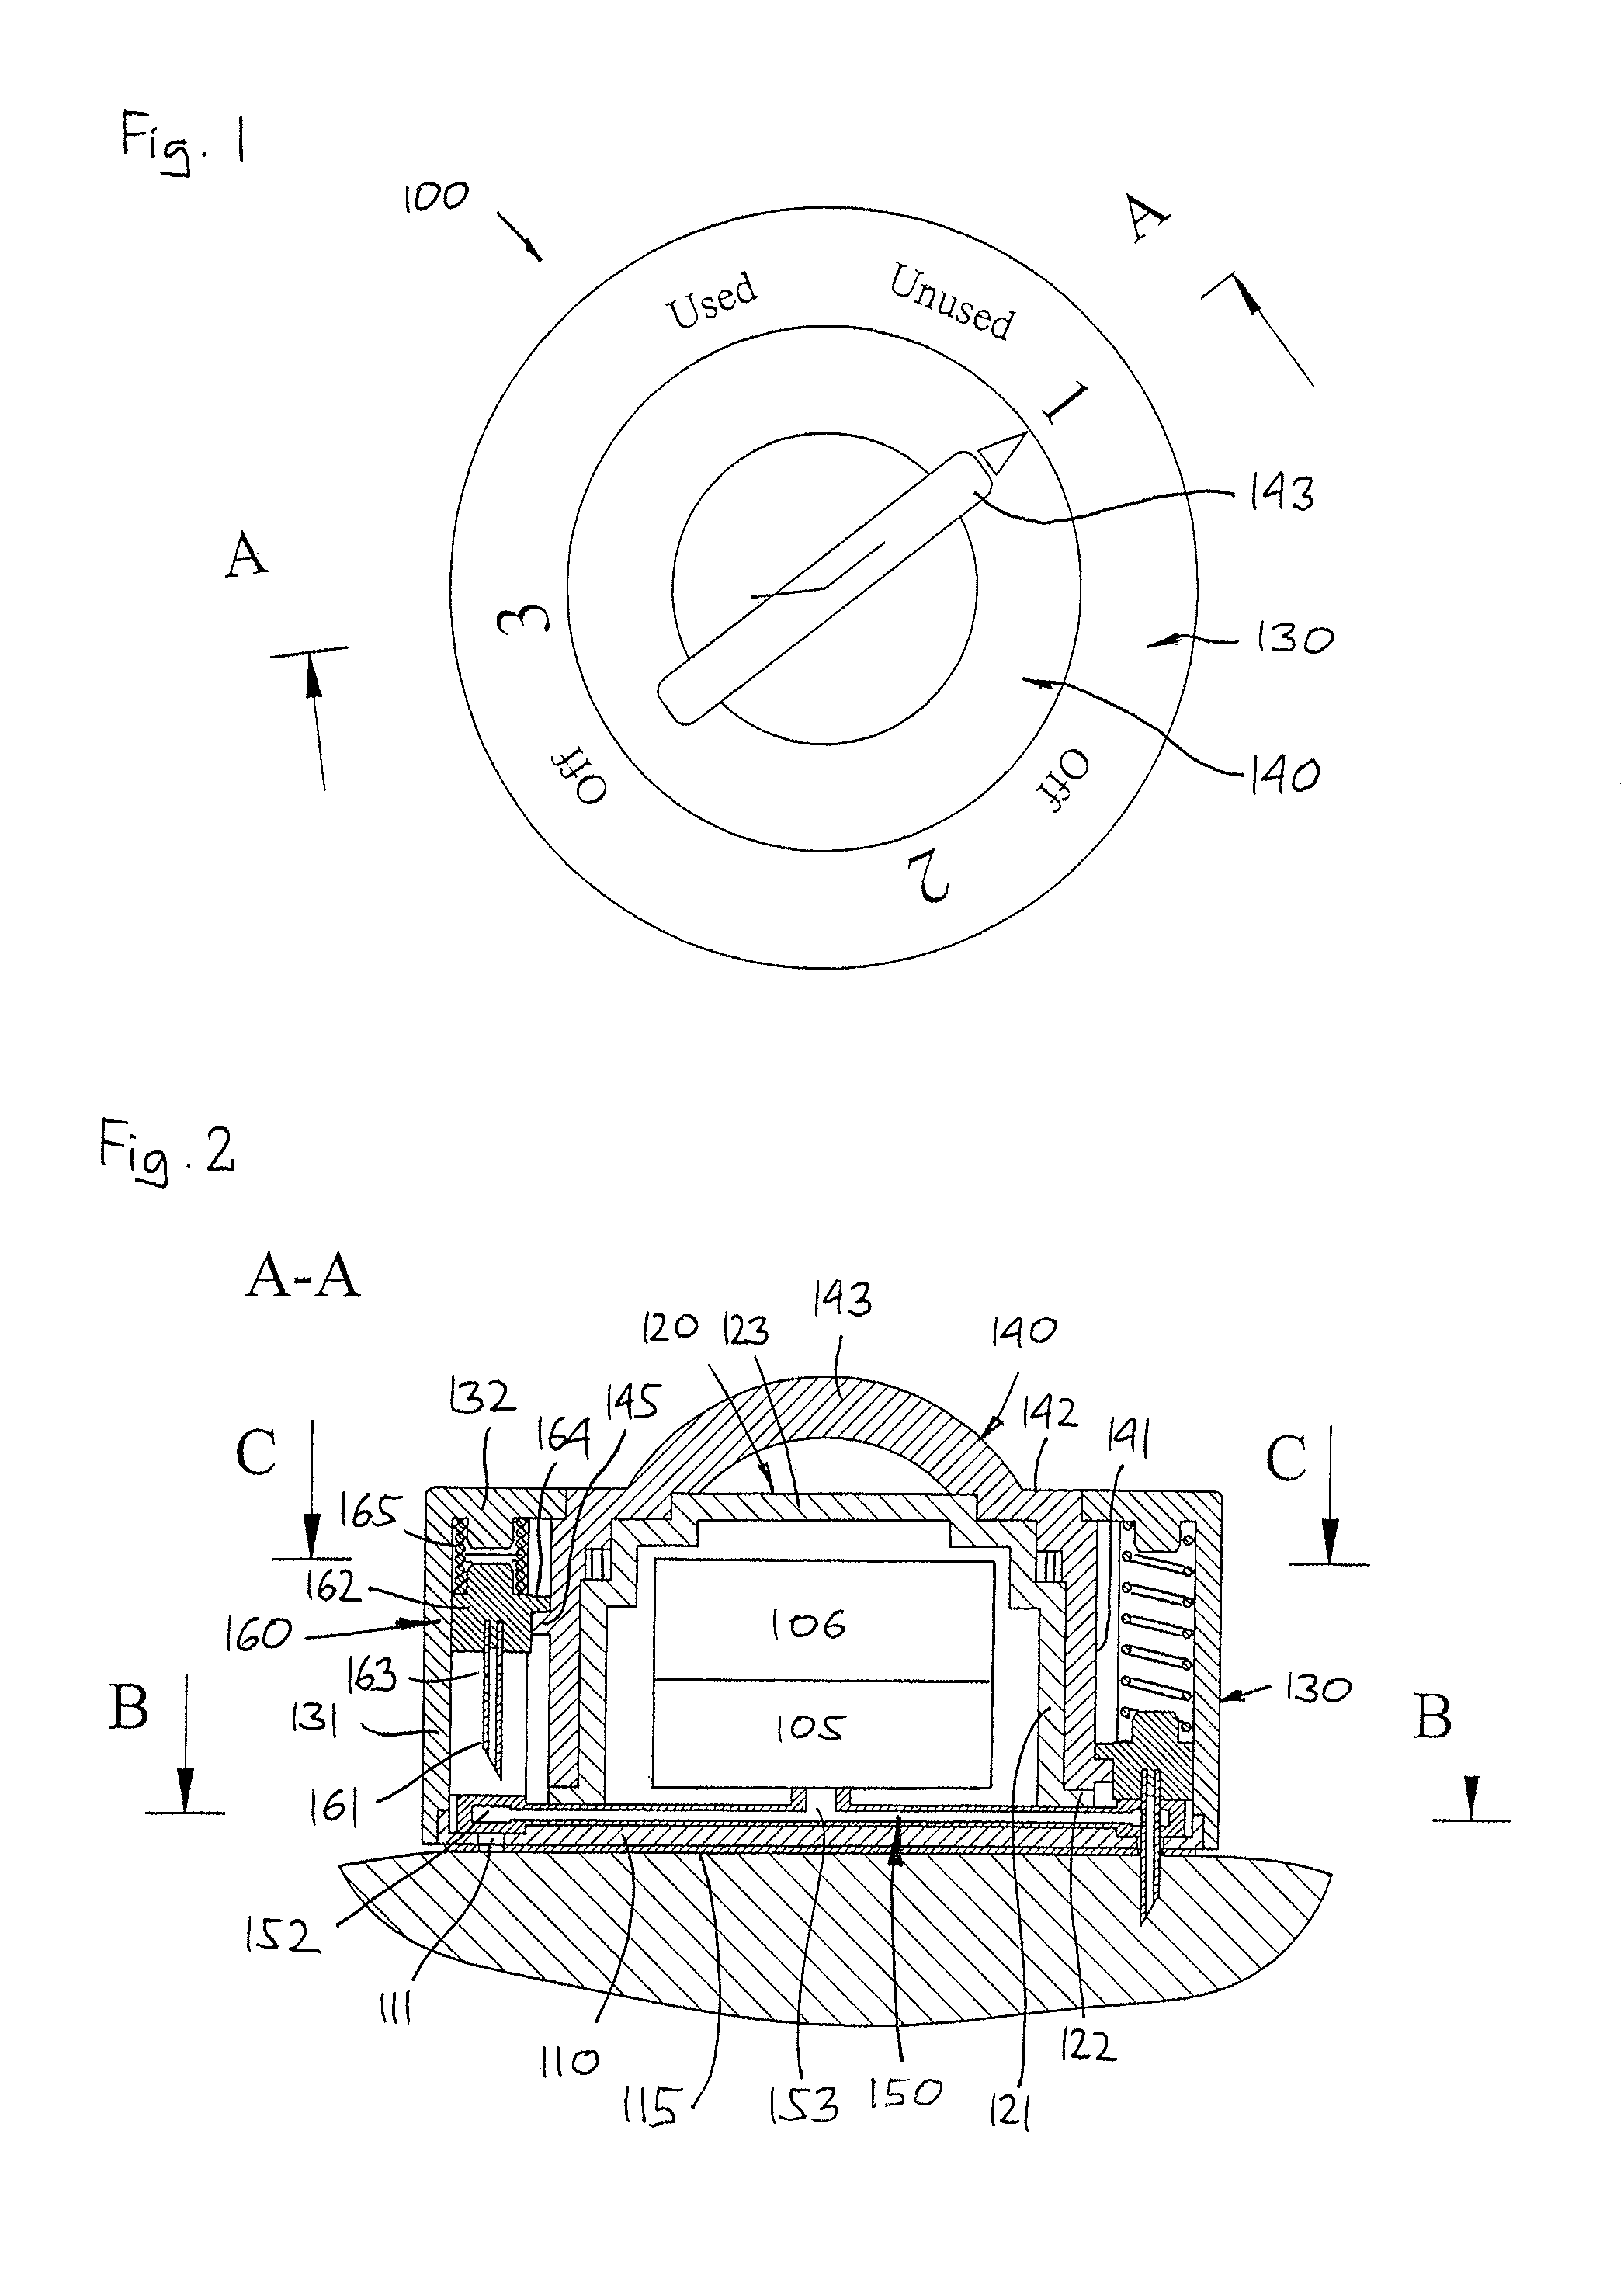 Needle device comprising a plurality of needles